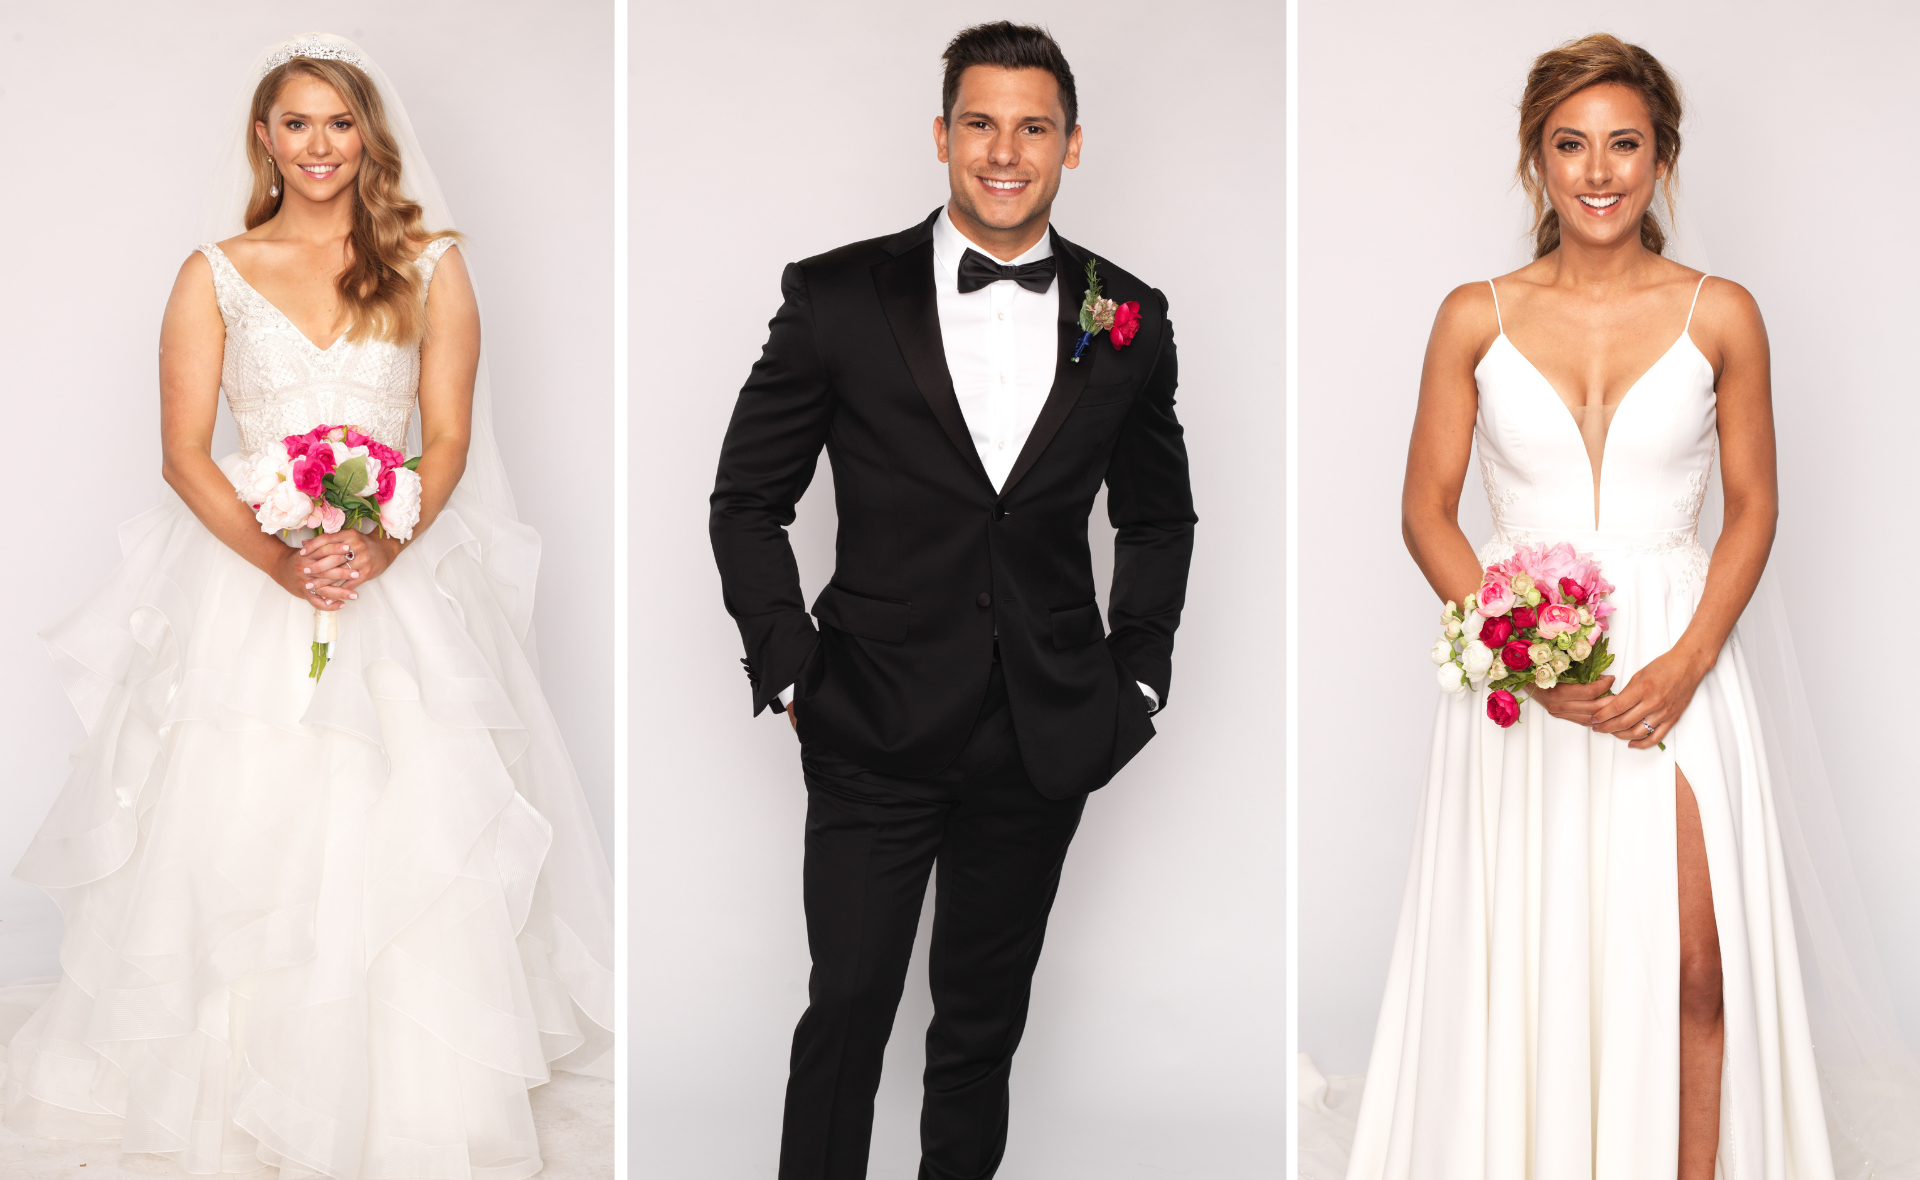 Meet the brides and grooms braving the aisle blind in Married At First Sight’s 2021 season